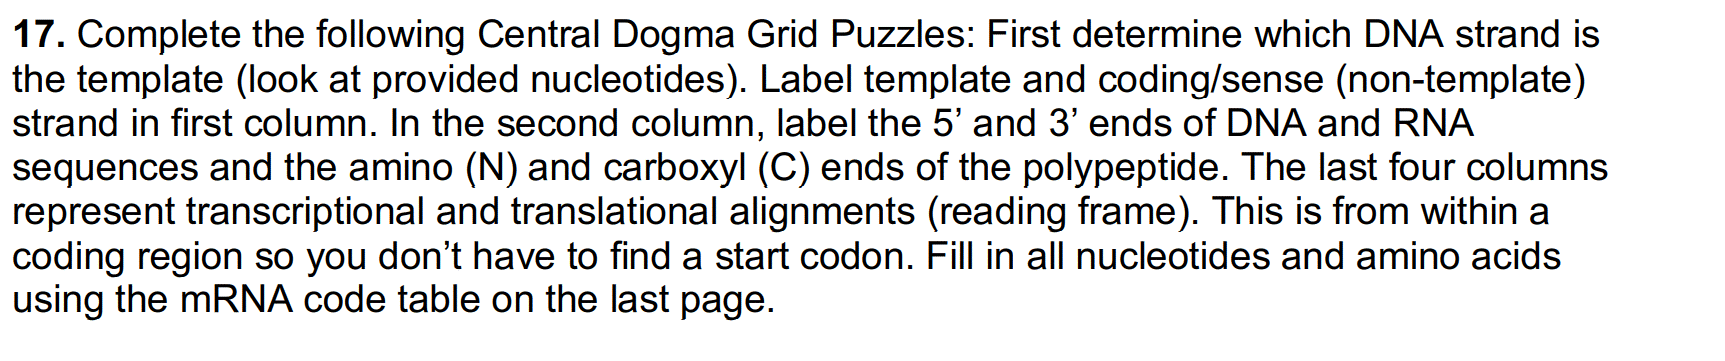 17. Complete the following Central Dogma Grid Puzzles: First determine which DNA strand is
the template (look at provided nucleotides). Label template and coding/sense (non-template)
strand in first column. In the second column, label the 5' and 3' ends of DNA and RNA
sequences and the amino (N) and carboxyl (C) ends of the polypeptide. The last four columns
represent transcriptional and translational alignments (reading frame). This is from within a
coding region so you don't have to find a start codon. Fill in all nucleotides and amino acids
using the MRNA code table on the last page.
